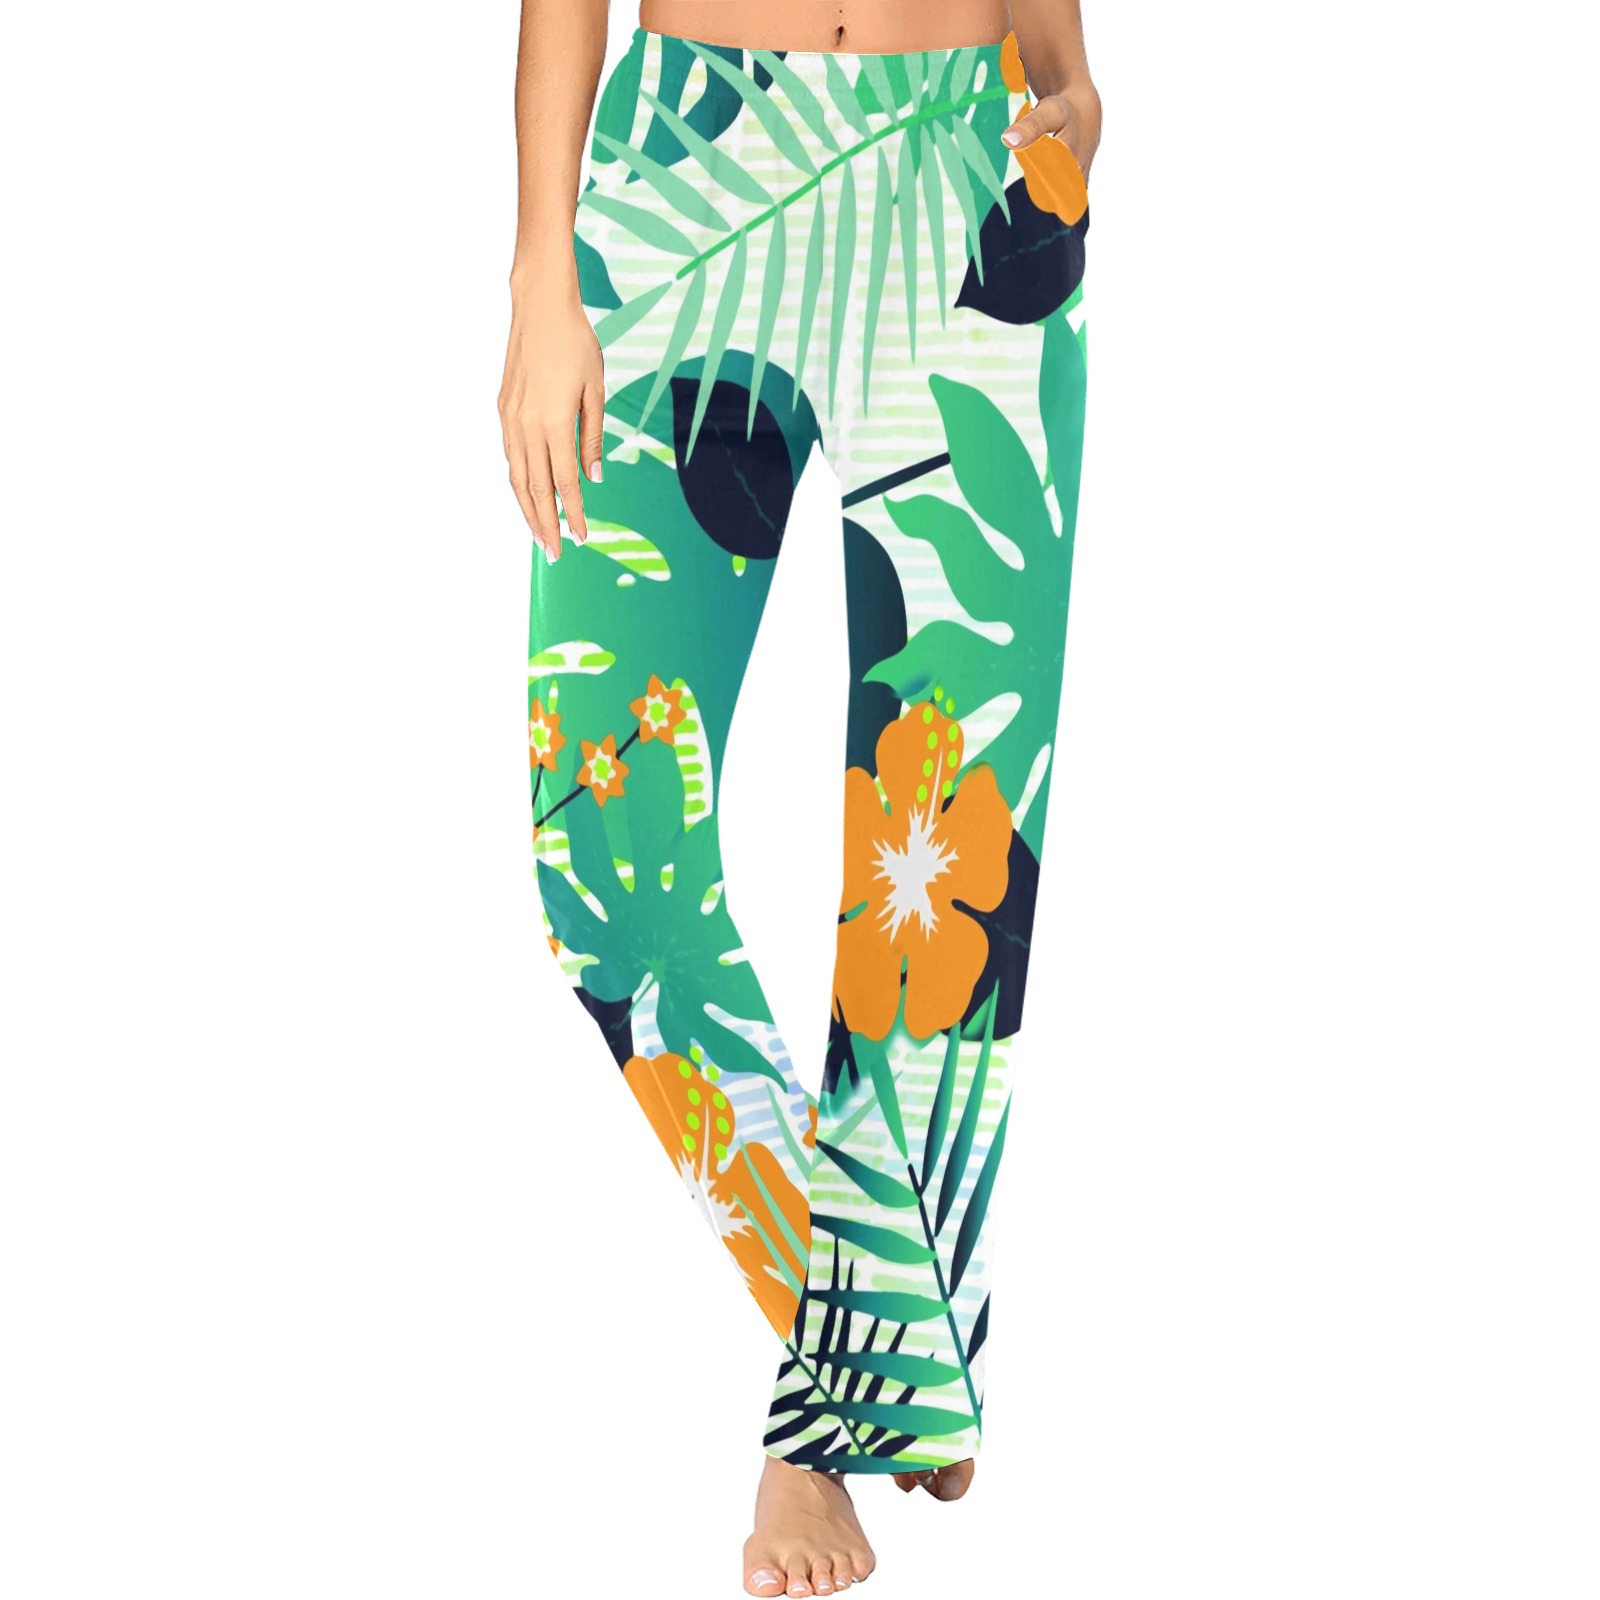 GROOVY FUNK THING FLORAL Women's Pajama Trousers